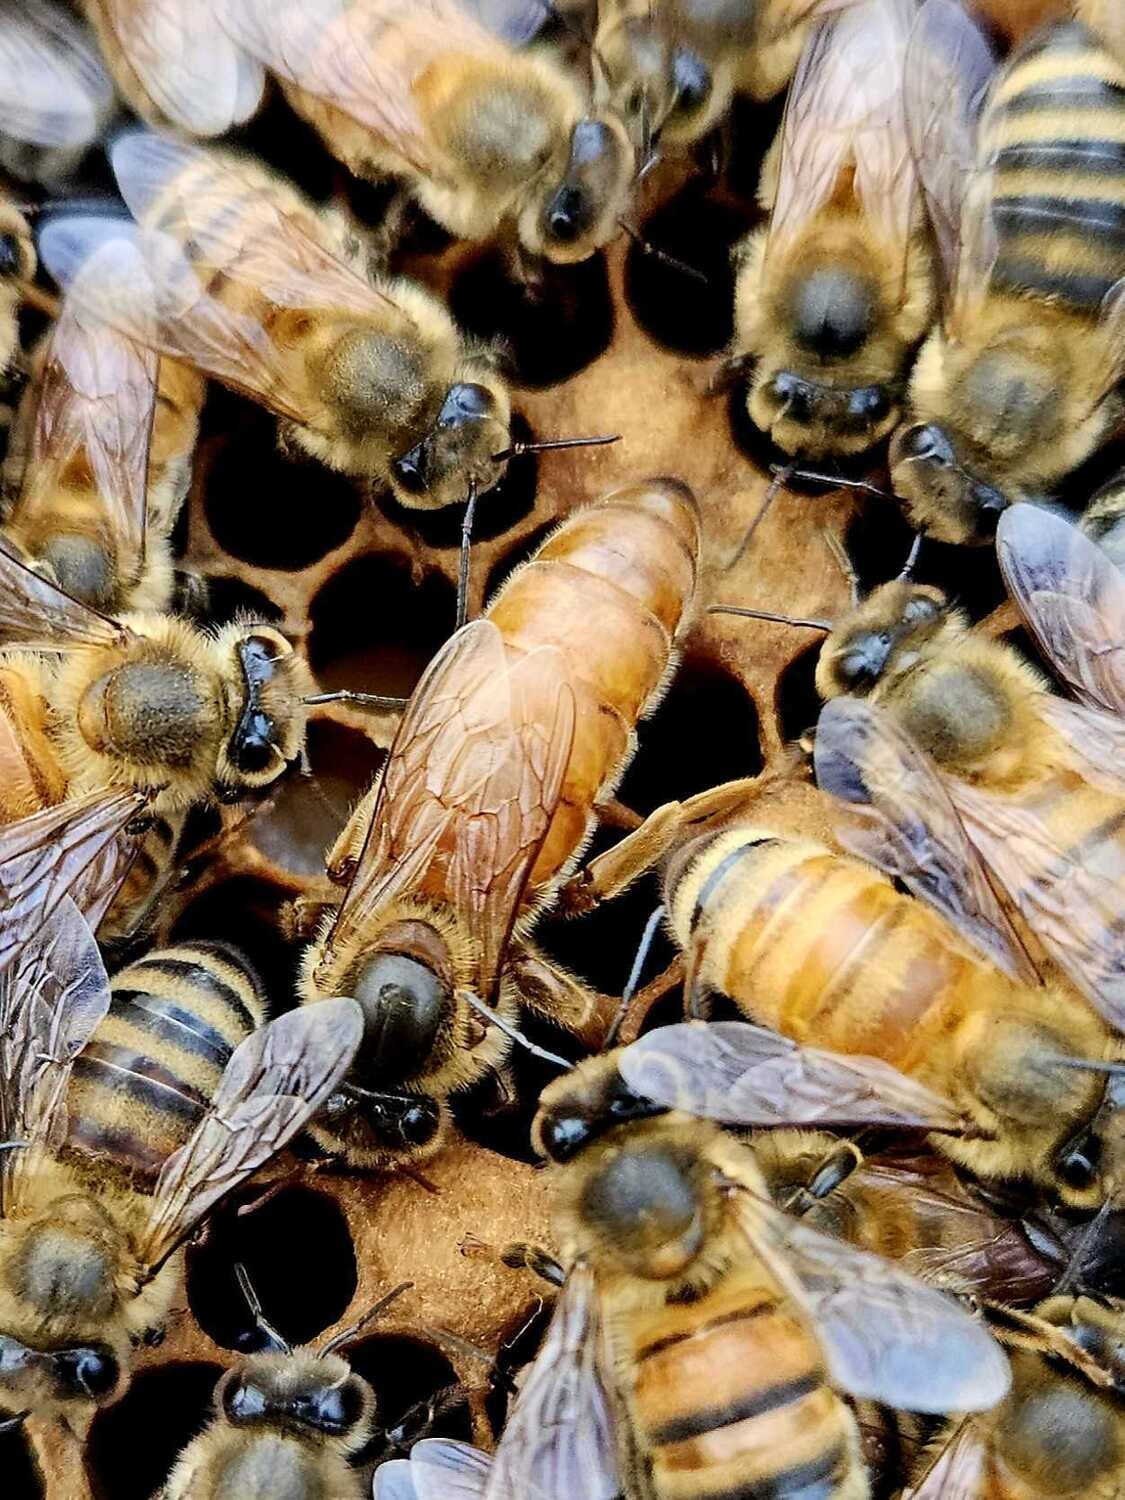 Queen honey bee surrounded by workers